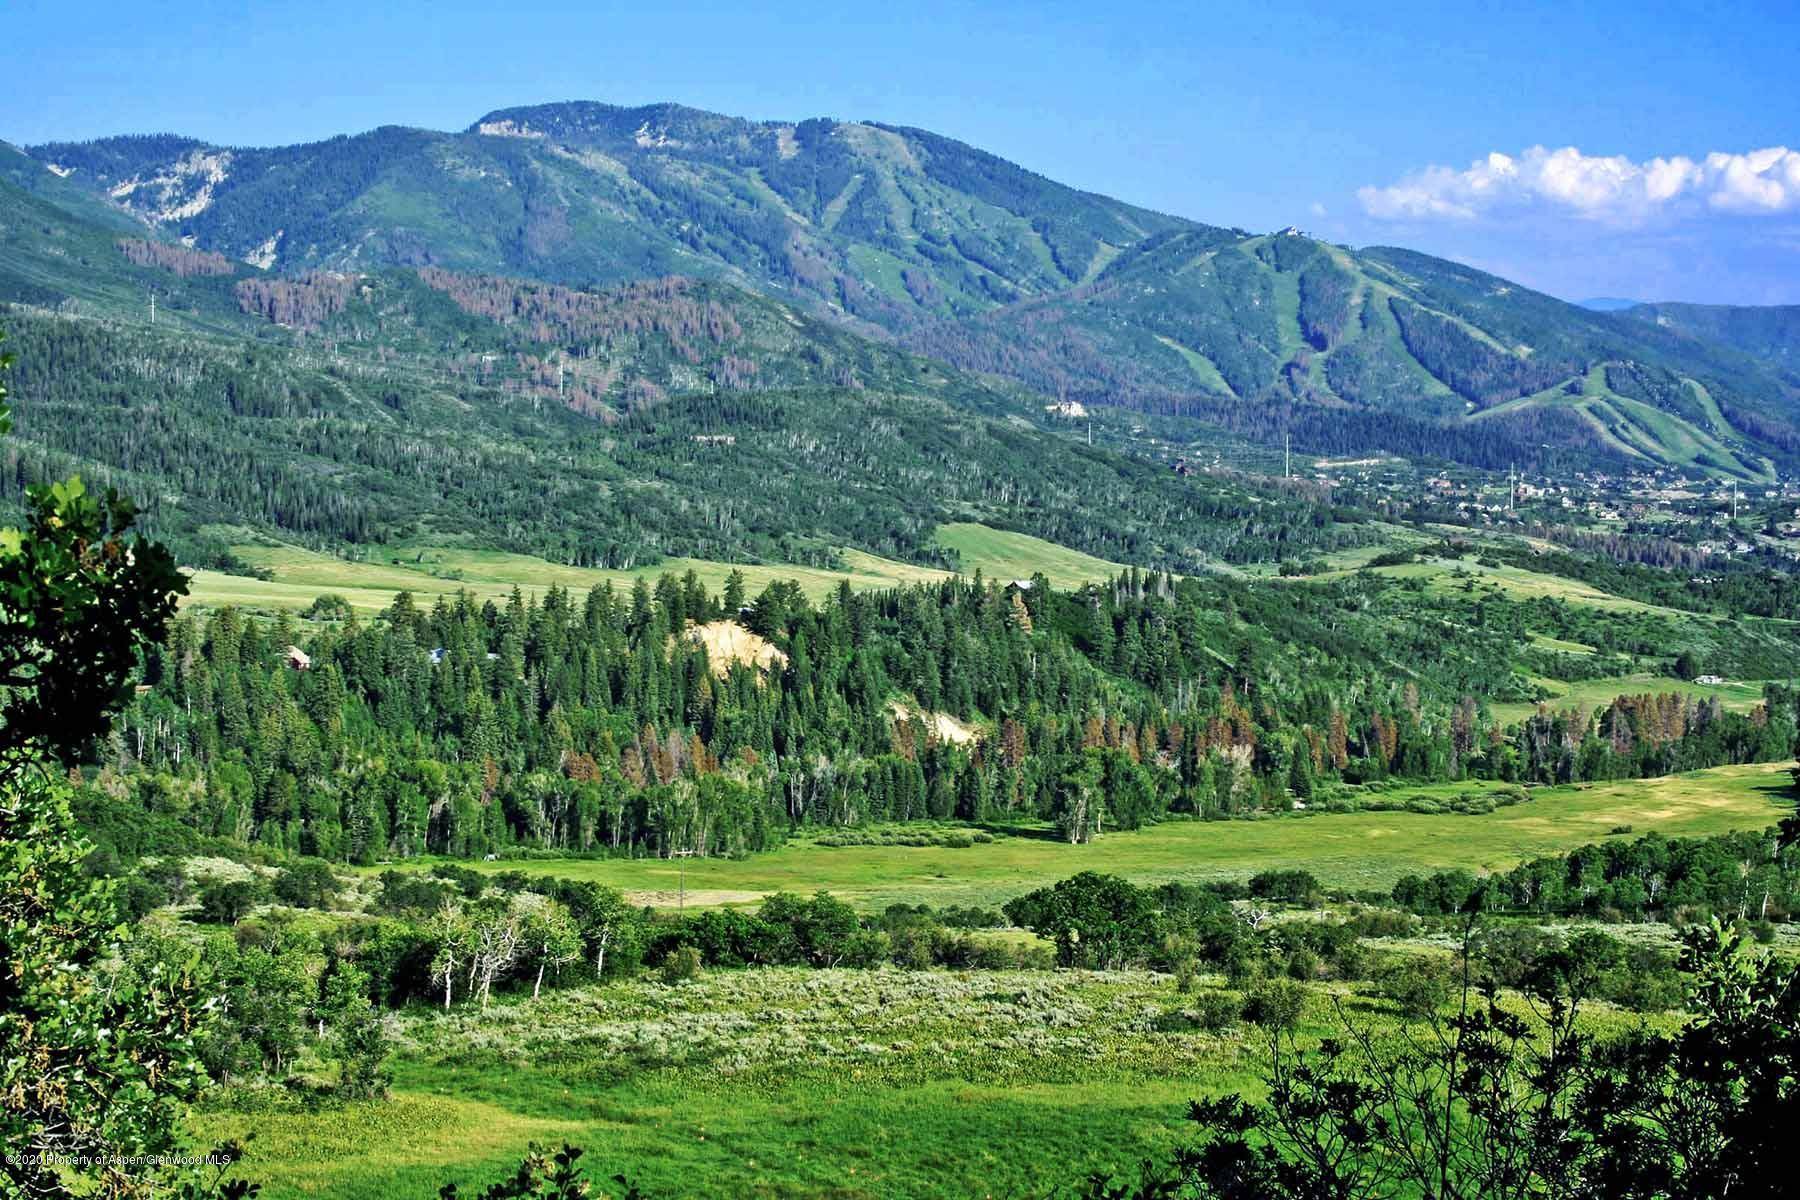 An extraordinary mountain retreat located just two miles from downtown Steamboat Springs, 562 acre Strawberry Park Ranch features an unparalleled combination of stunning scenery, diverse landscape, fishing stream, abundant wildlife, ...